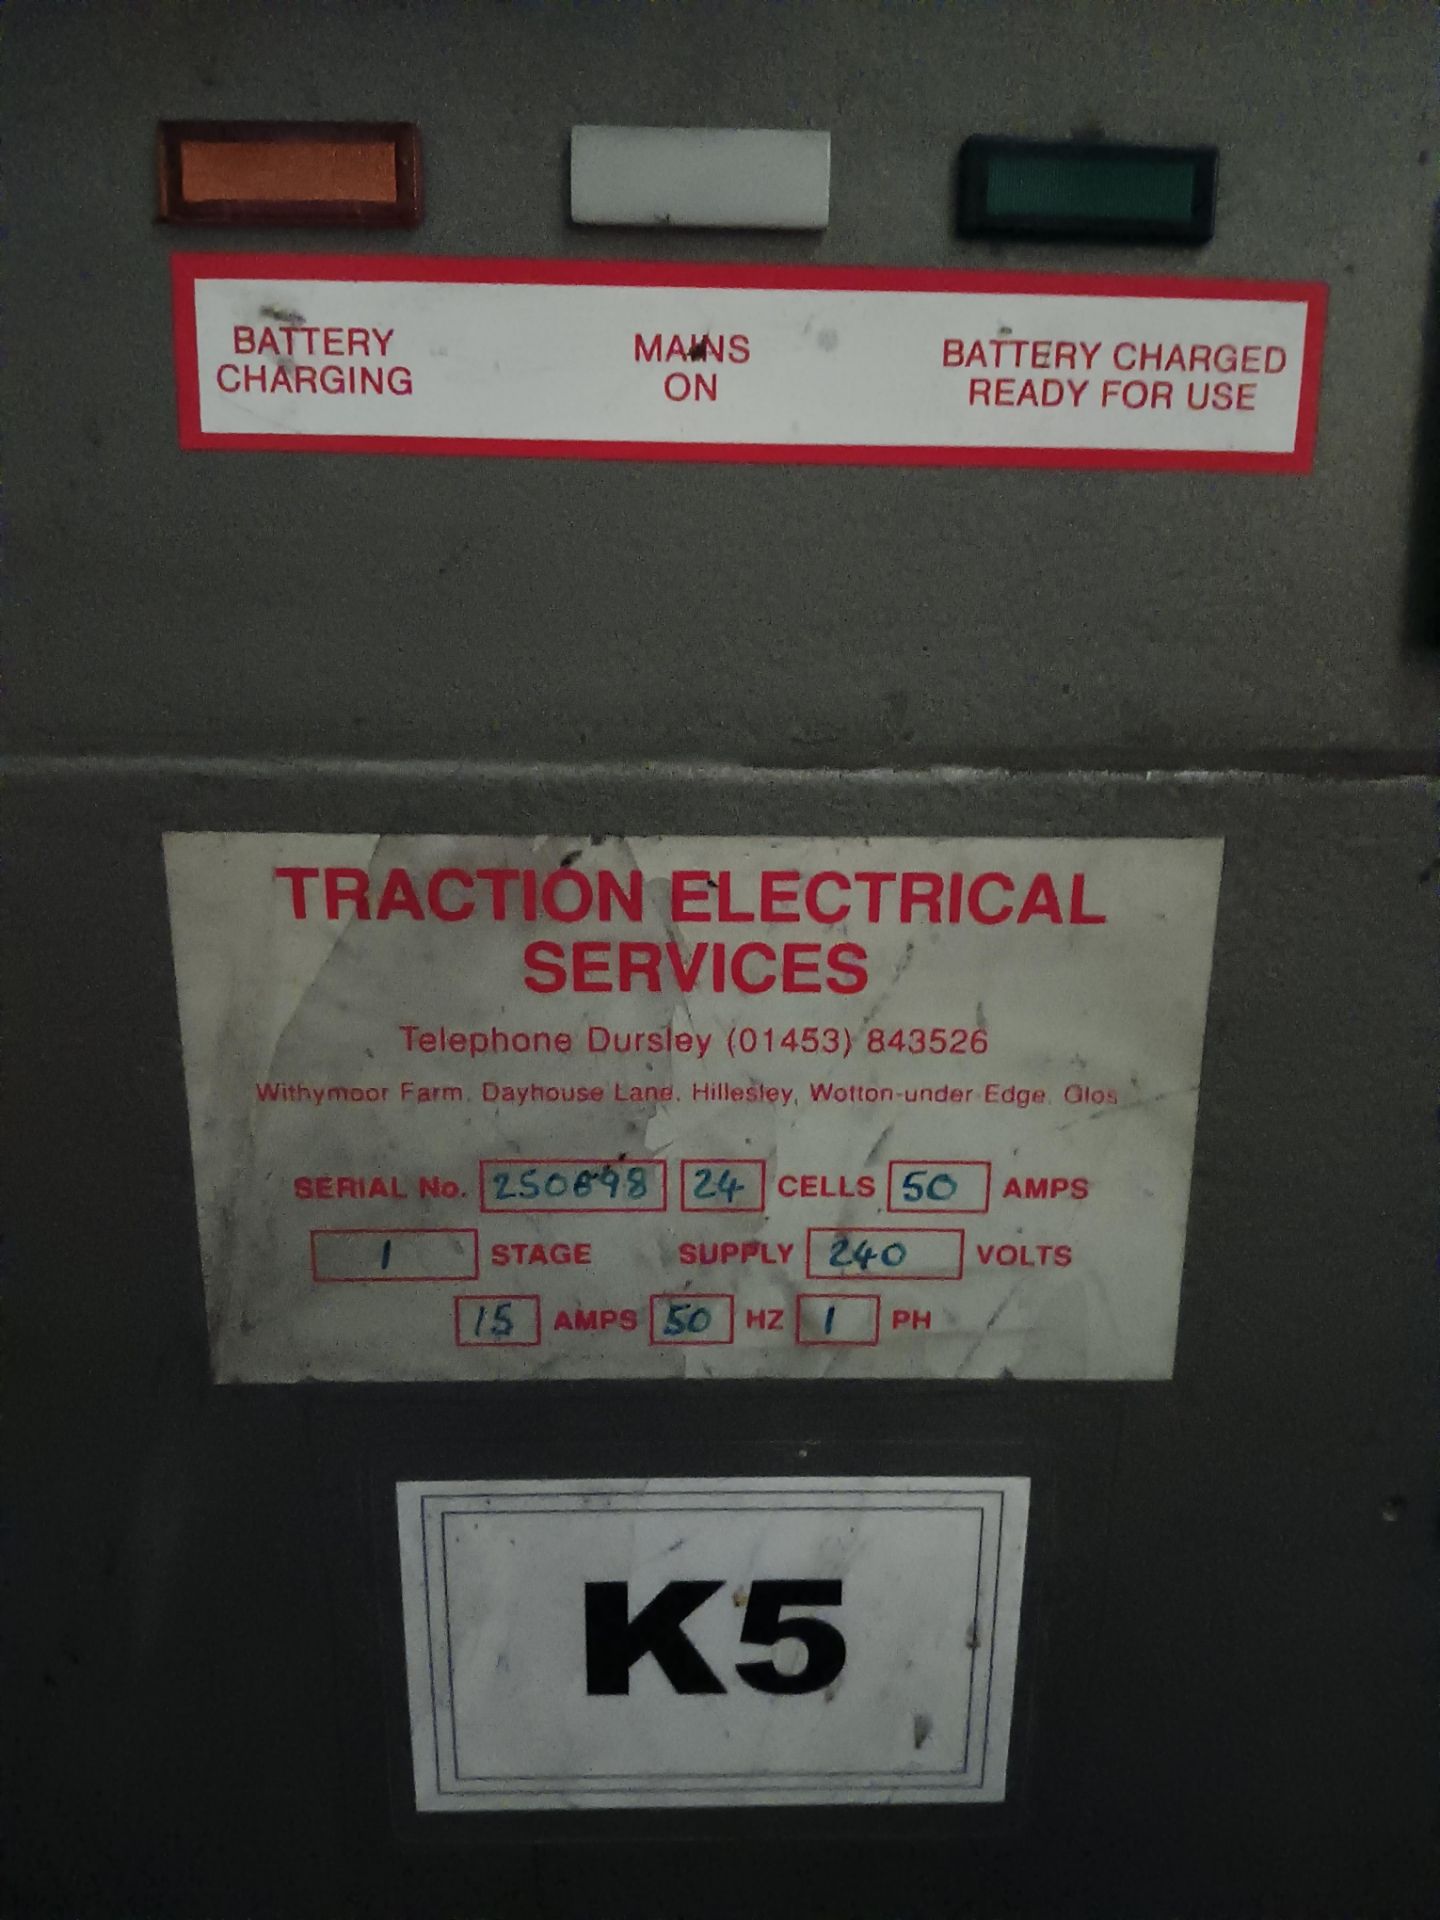 Traction electrical services Electric forklift tru - Image 3 of 3